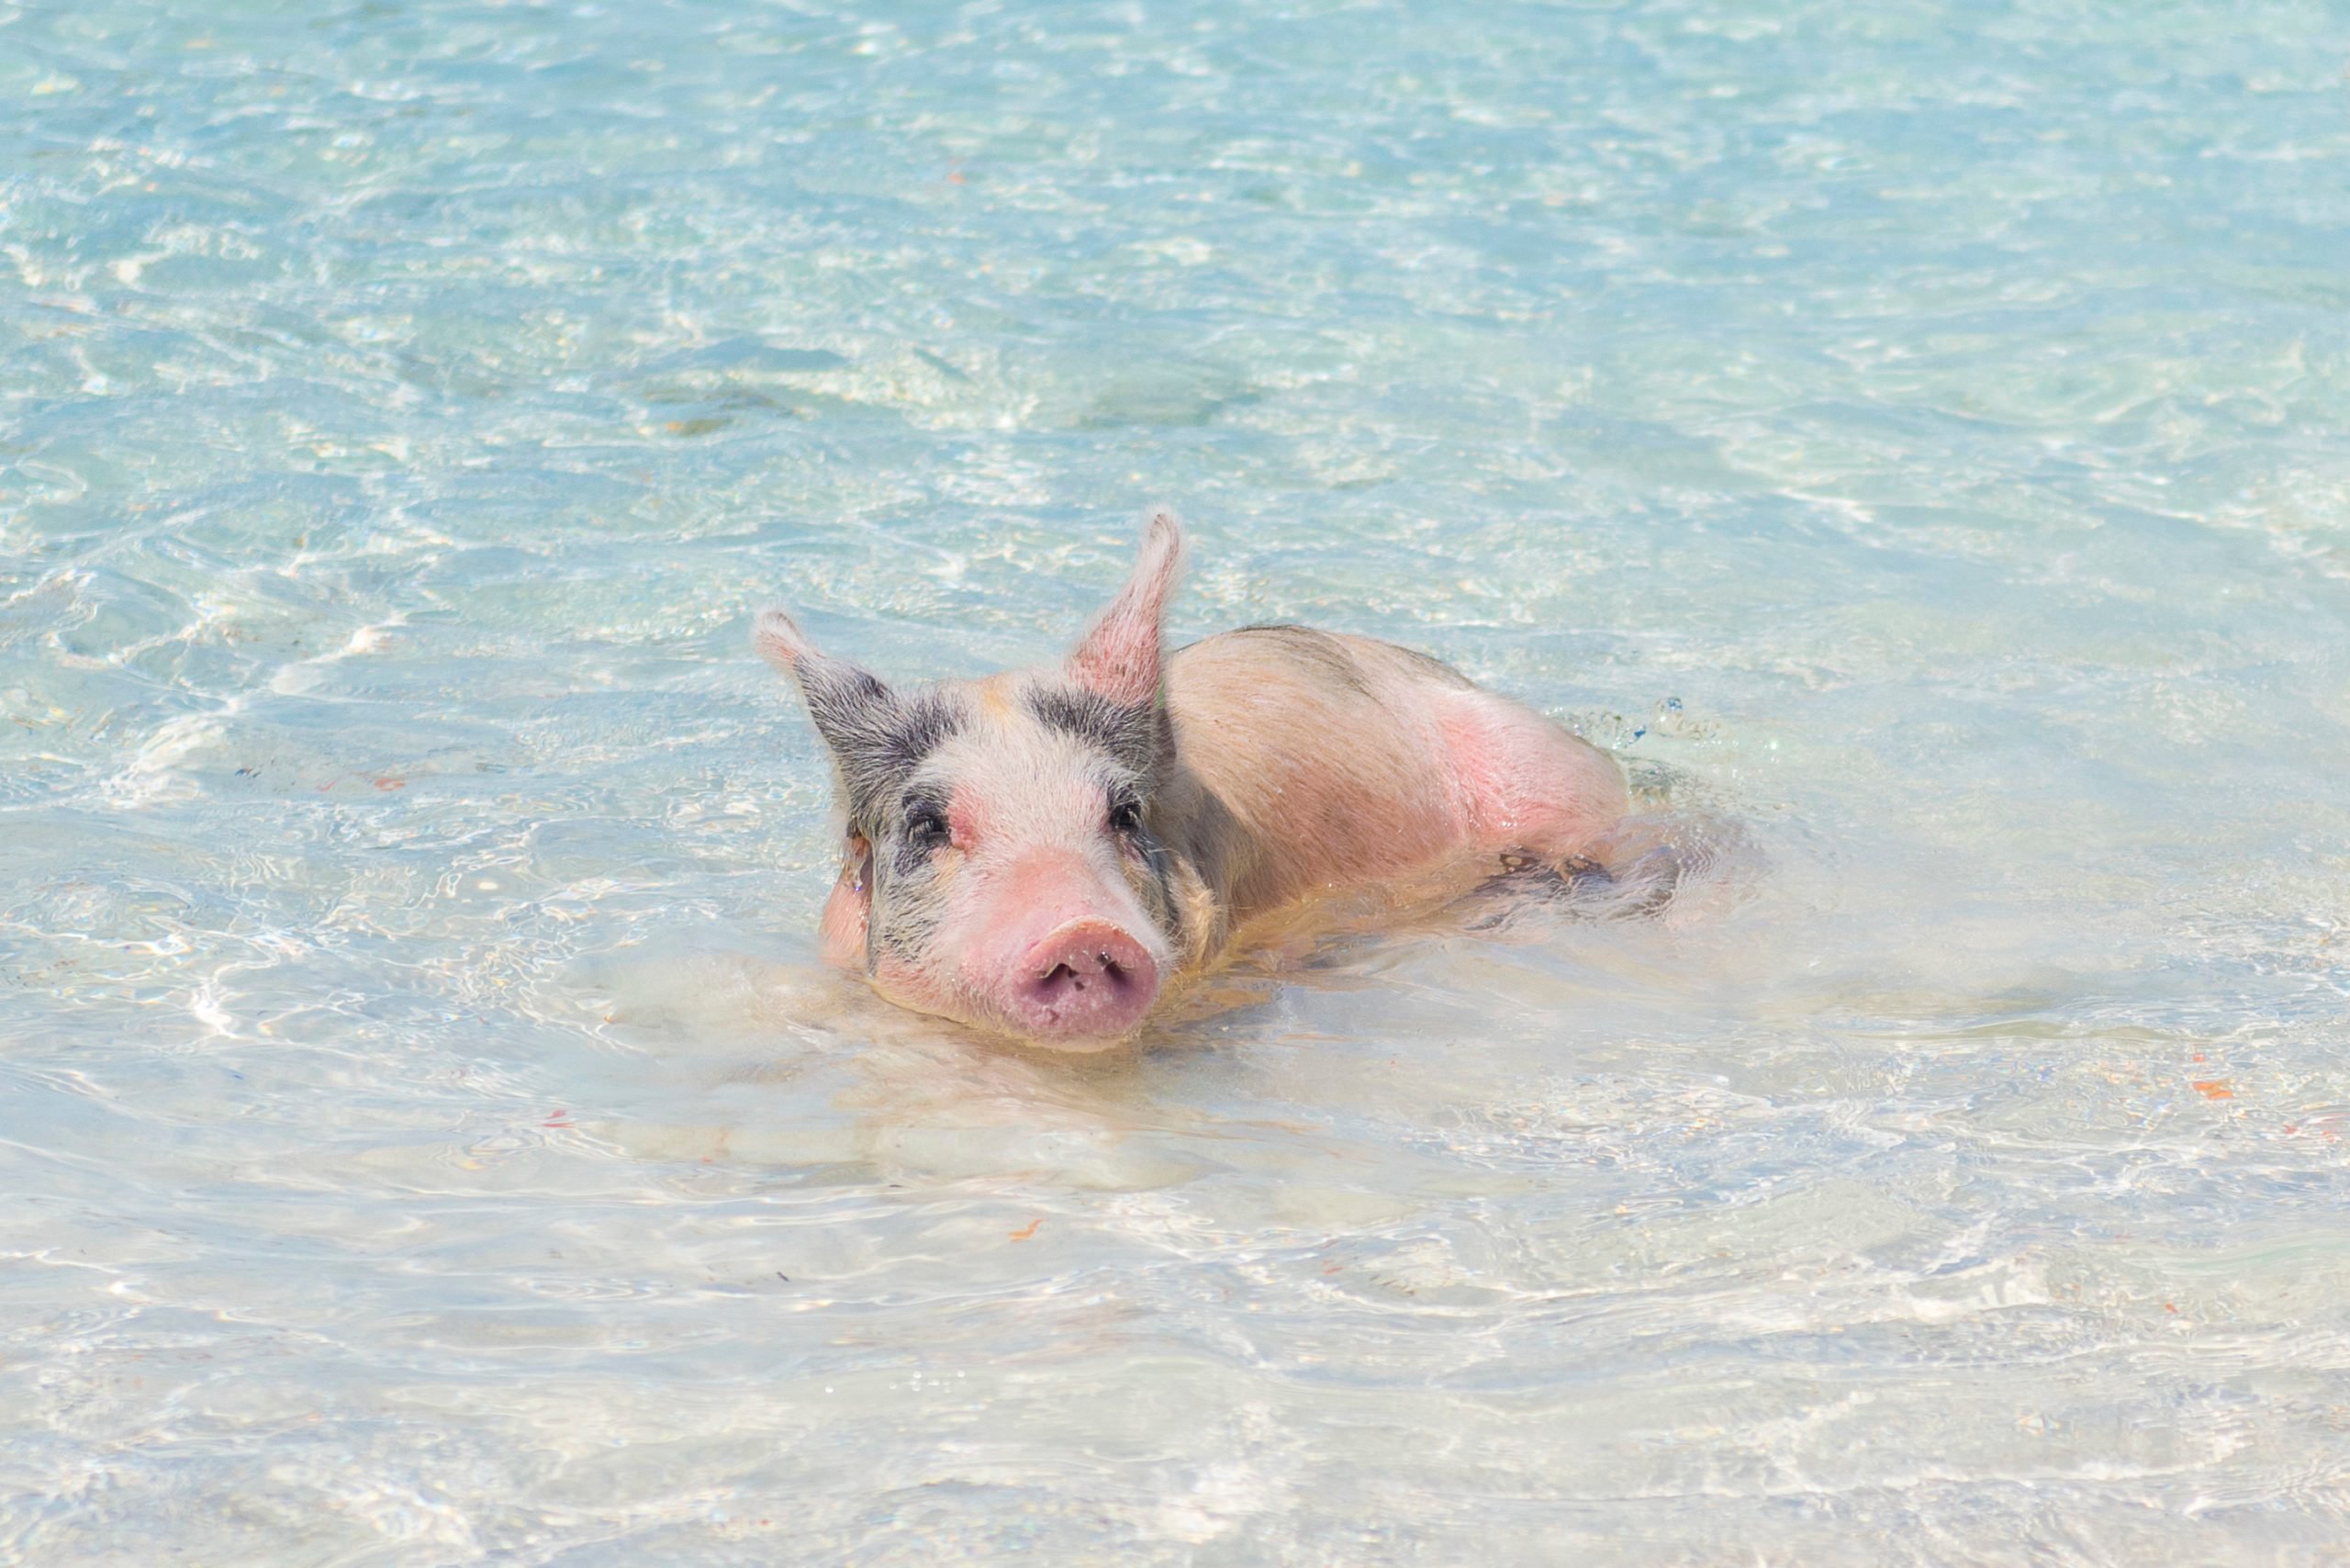 Wild Pig Sitting in Water at Pig Beach in the Bahamas